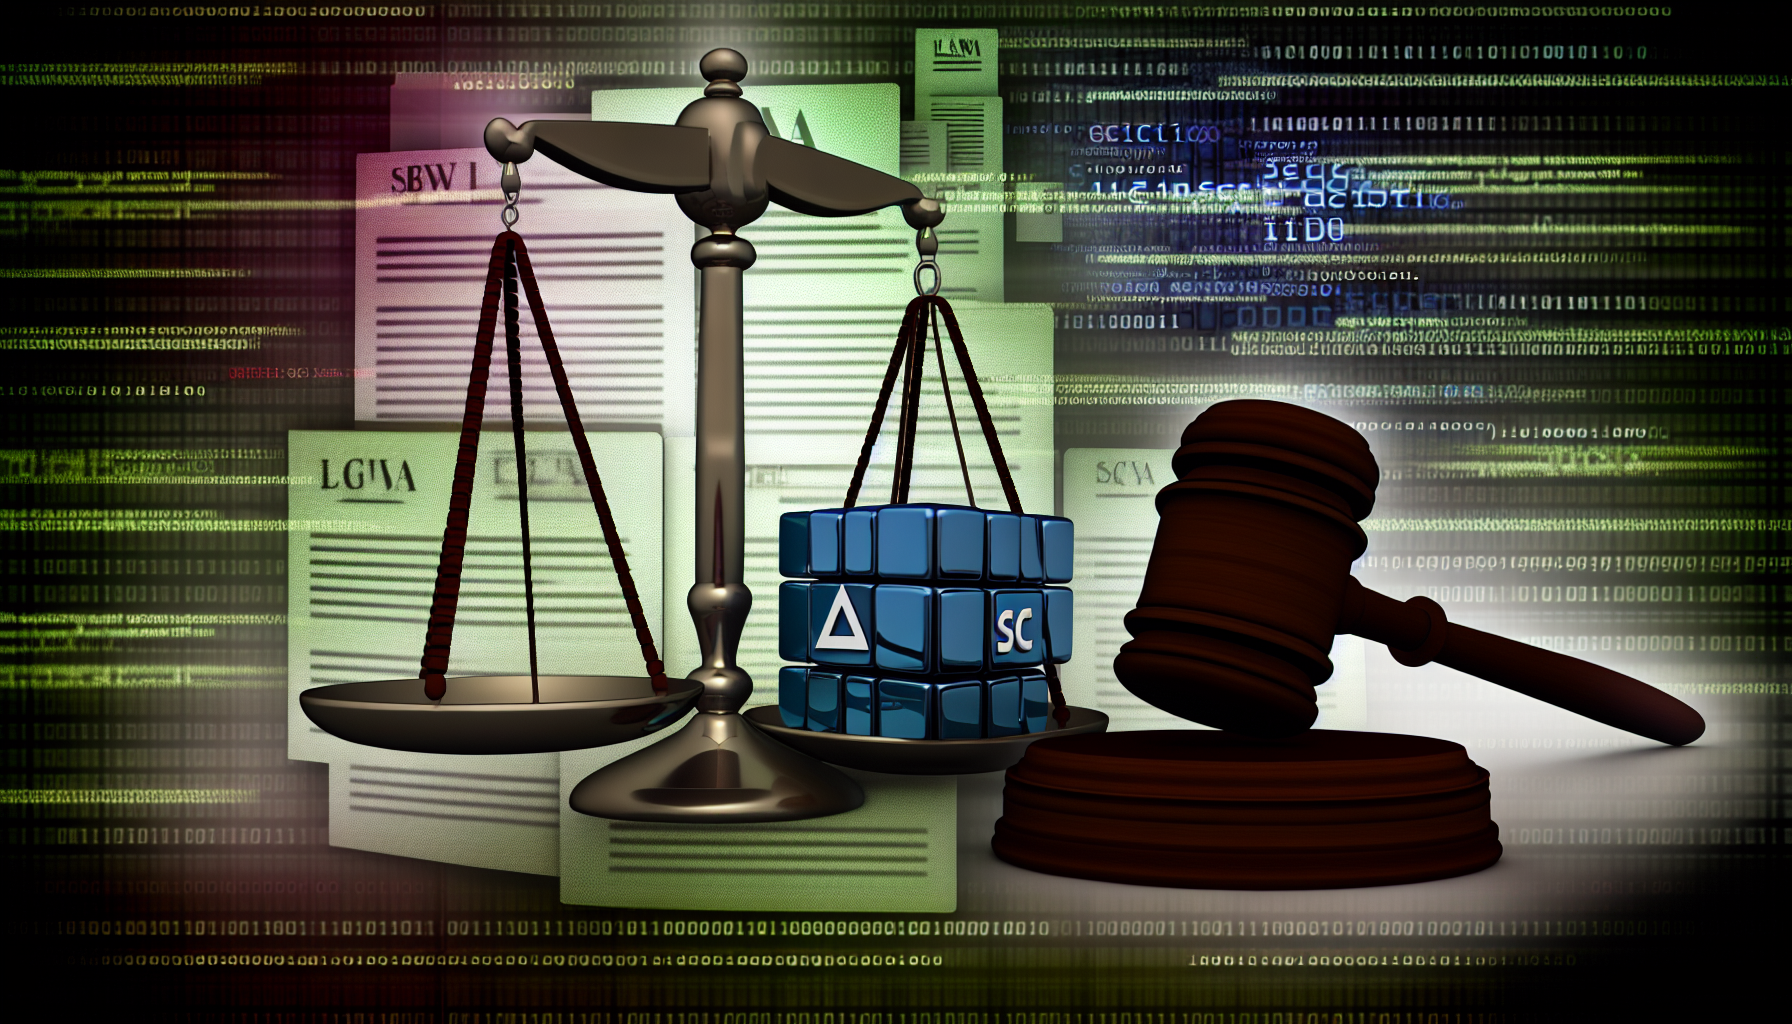 Autodesk's legal battle with SEC: how it could reshape the software industry